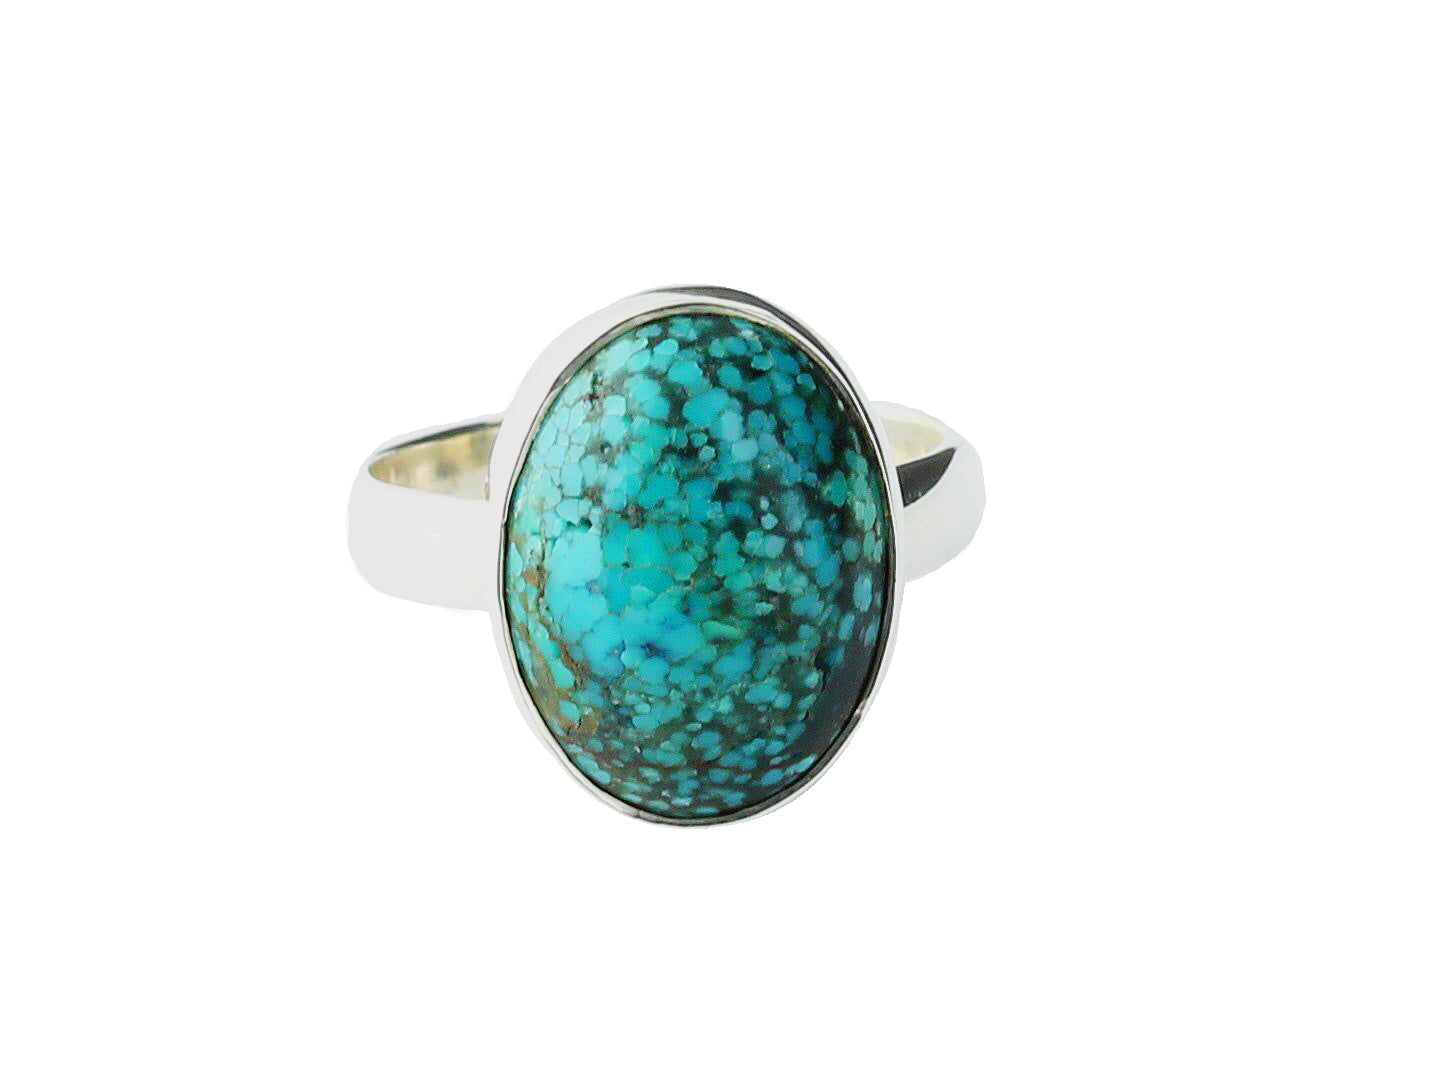 Speckled Turquoise Ring